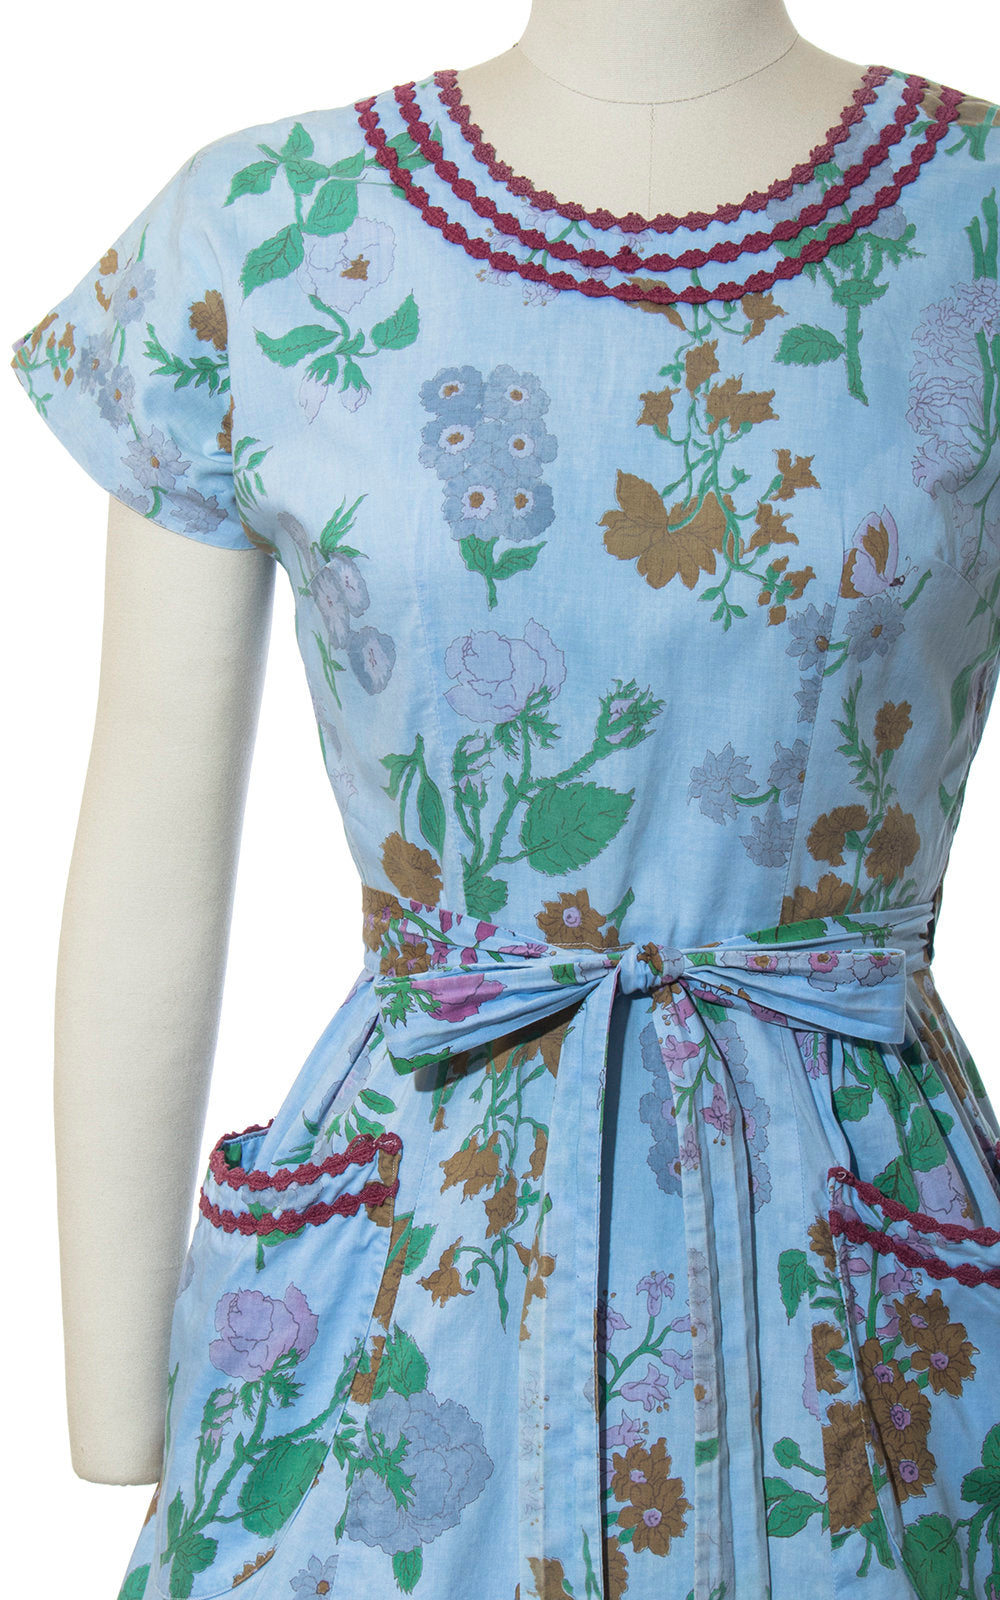 Vintage 1950s Dress | 50s SWIRL Wrap Dress Floral Butterfly Print Cotton Blue Full Skirt Day Dress with Pockets (small/medium)